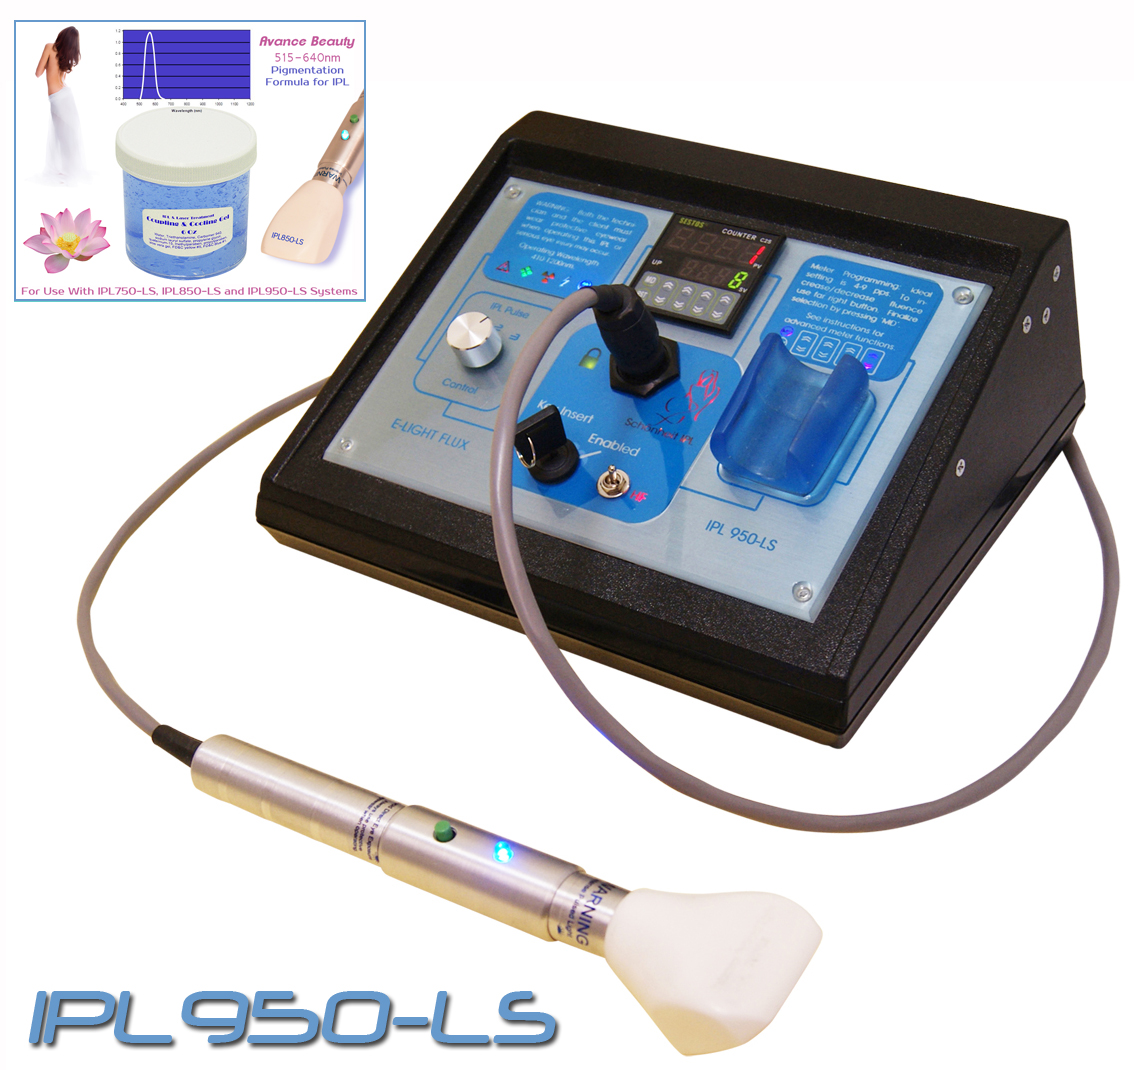 IPL950-LS Pigmentation Therapy Gel Kit 515-640nm with Beauty Treatment Machine, System, Device.  642057128605